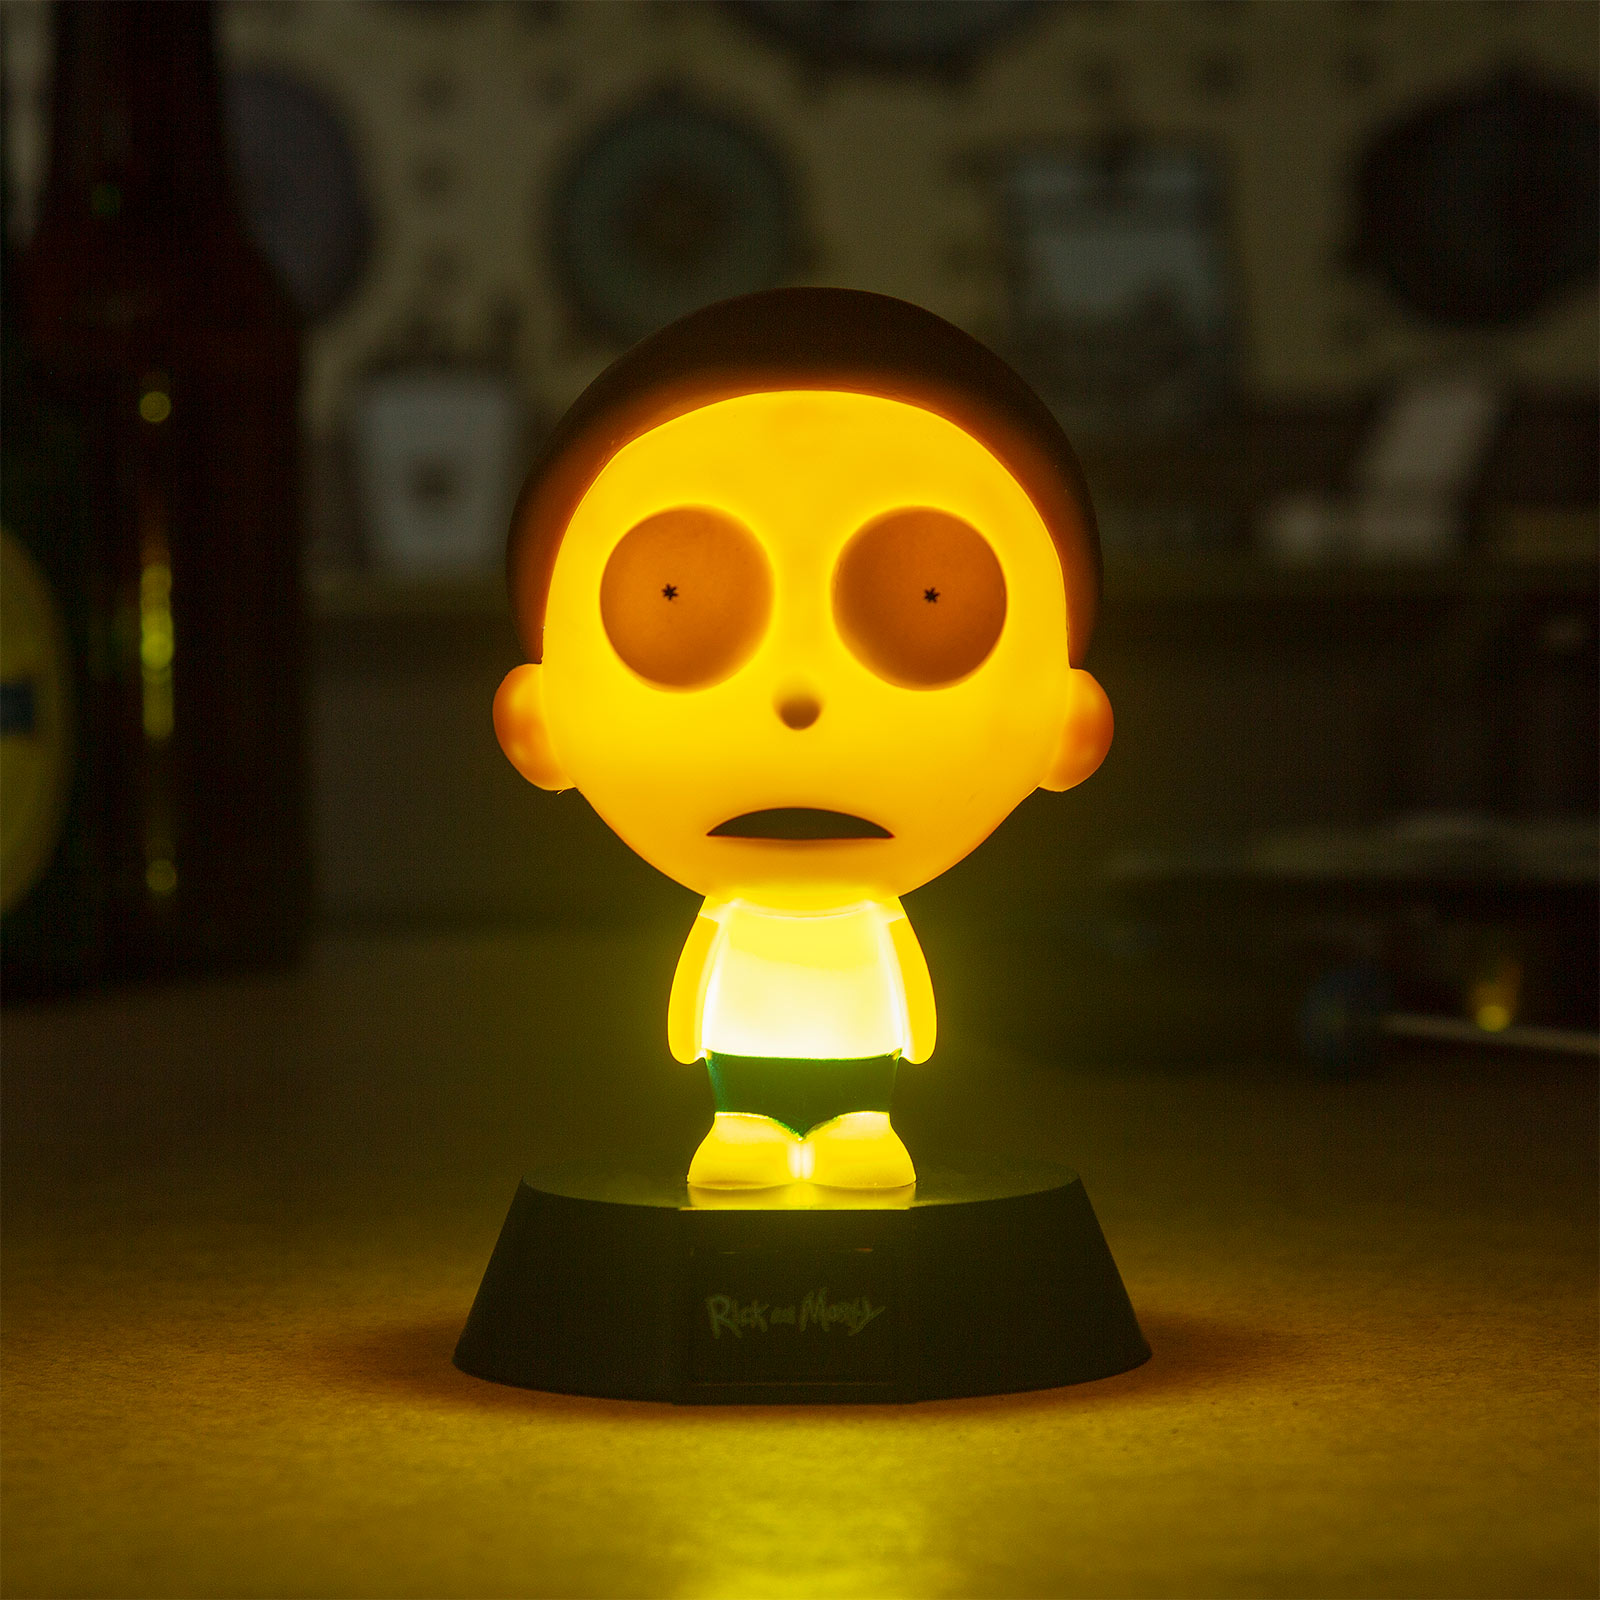 Rick and Morty - Morty Icons lampe de table 3D